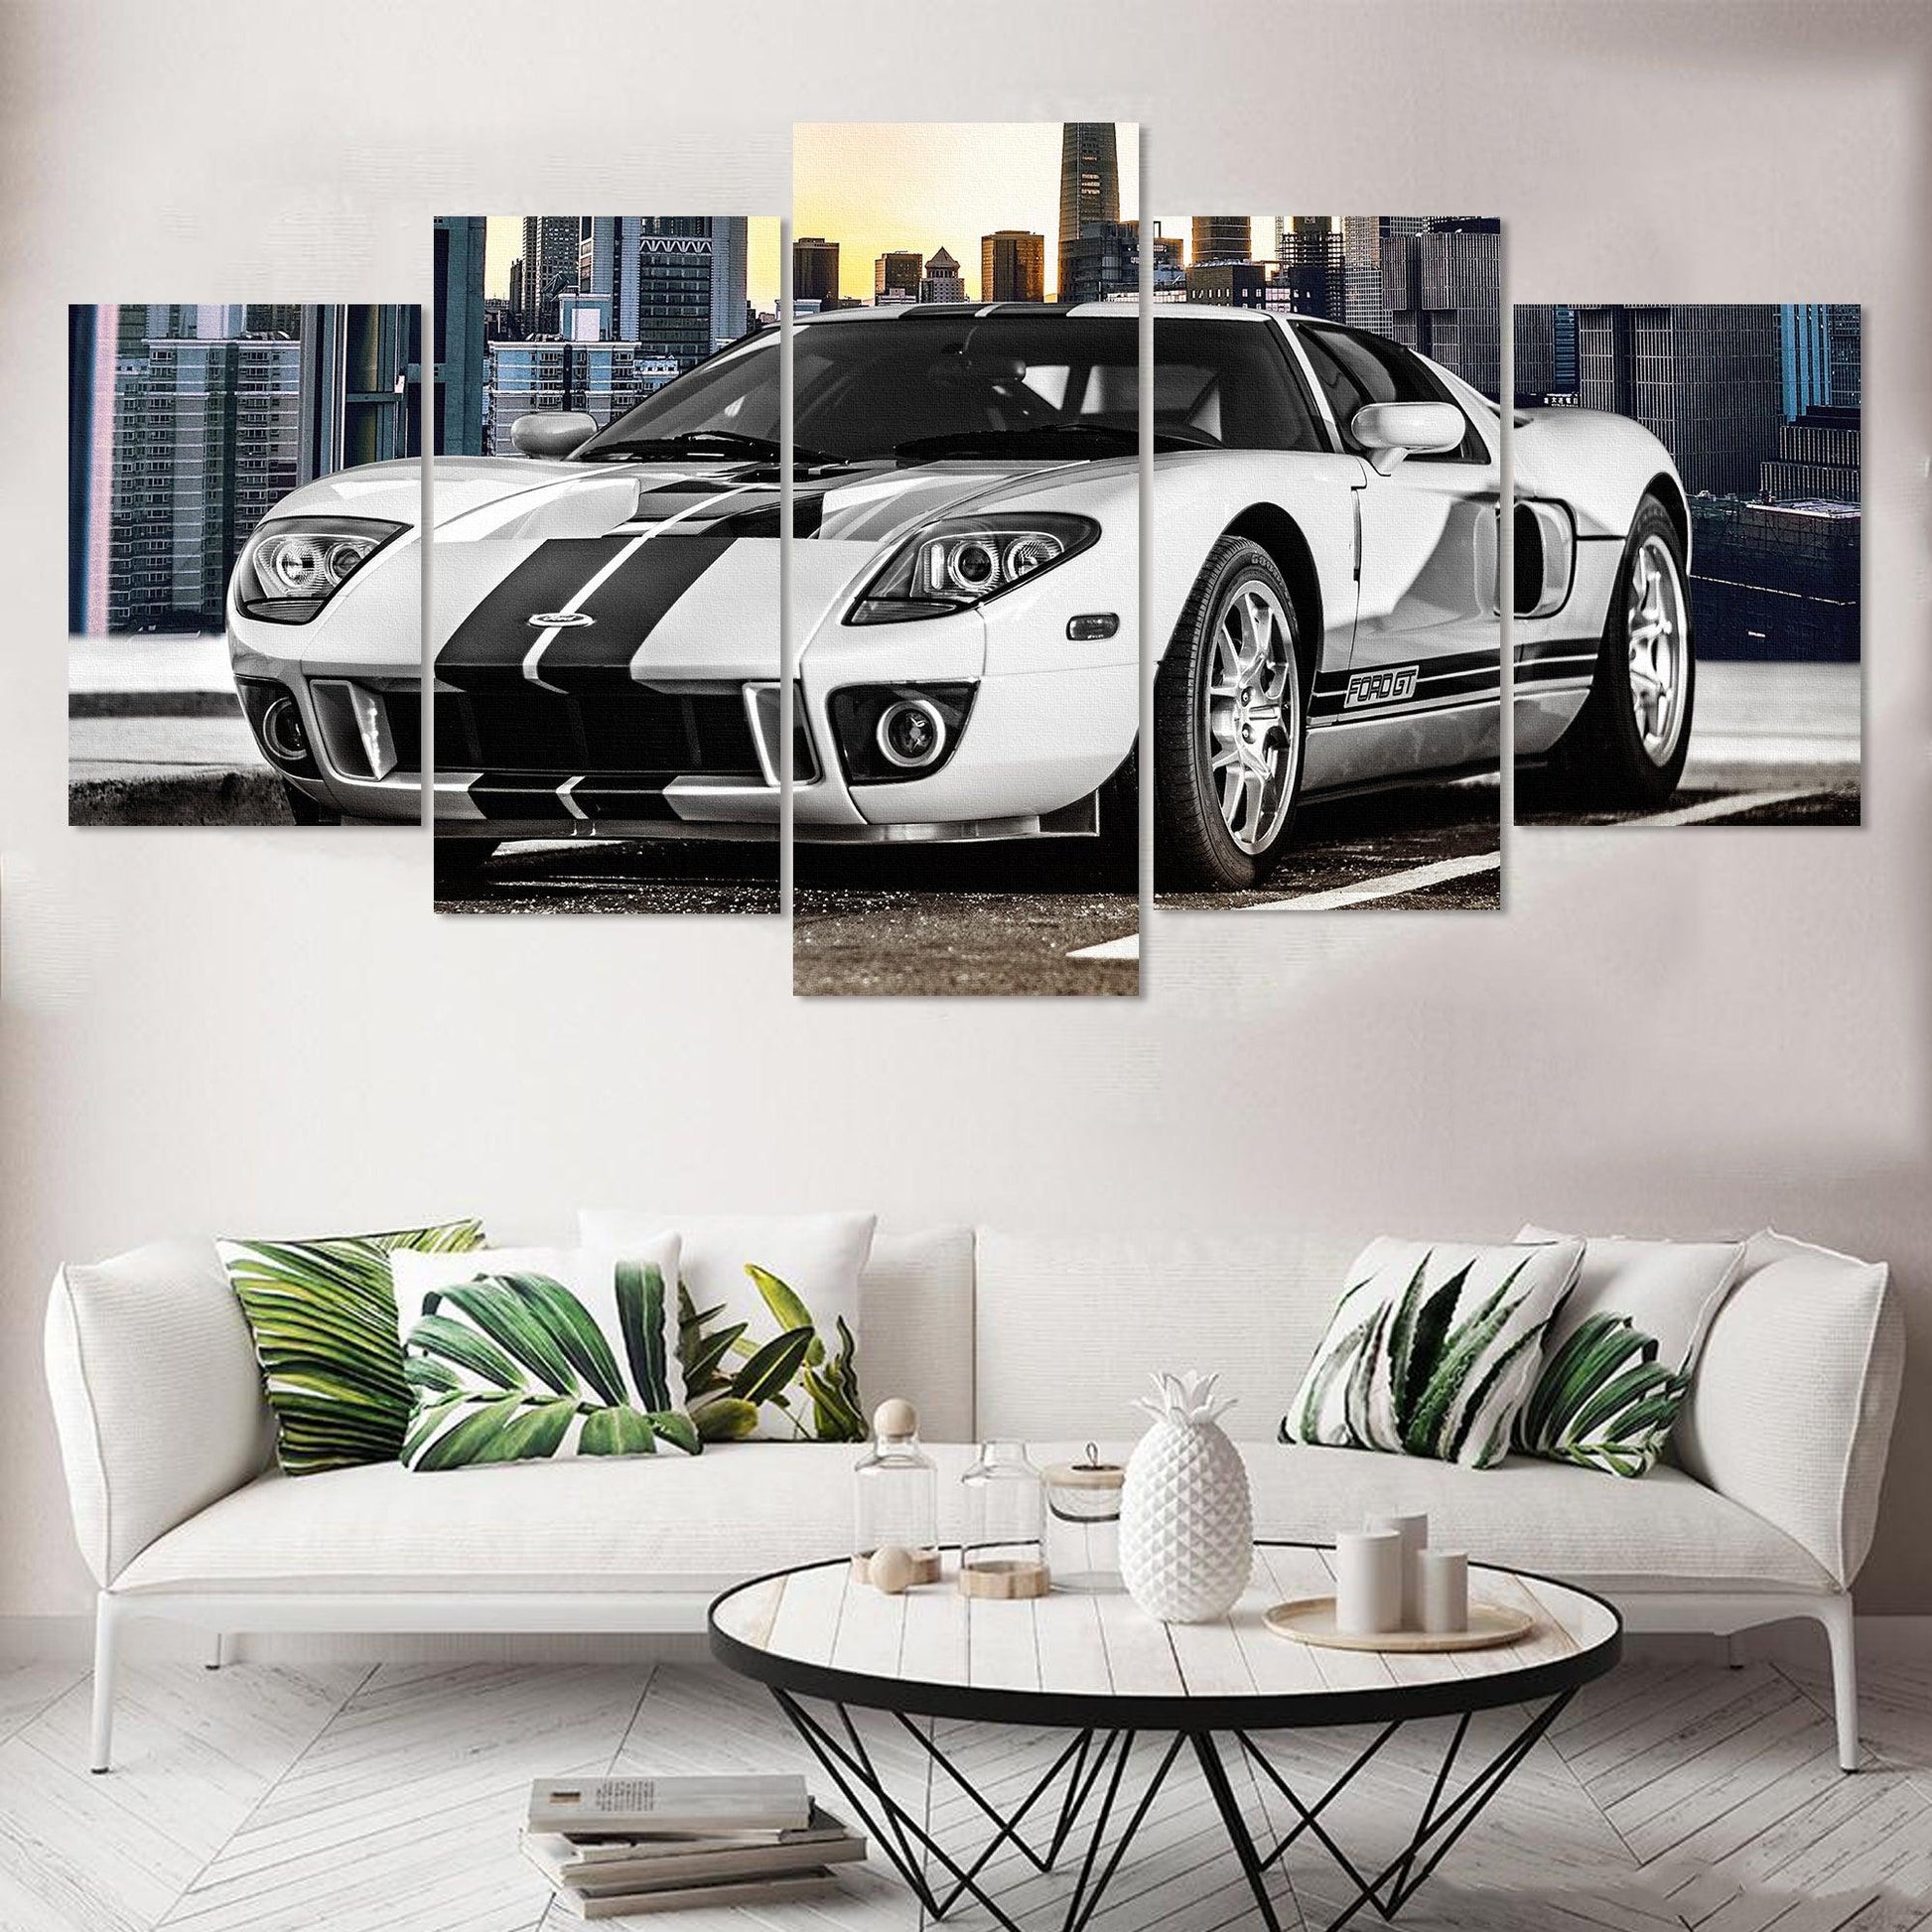 Ford GT 5 Panel Canvas Print Wall Art - GotItHere.com